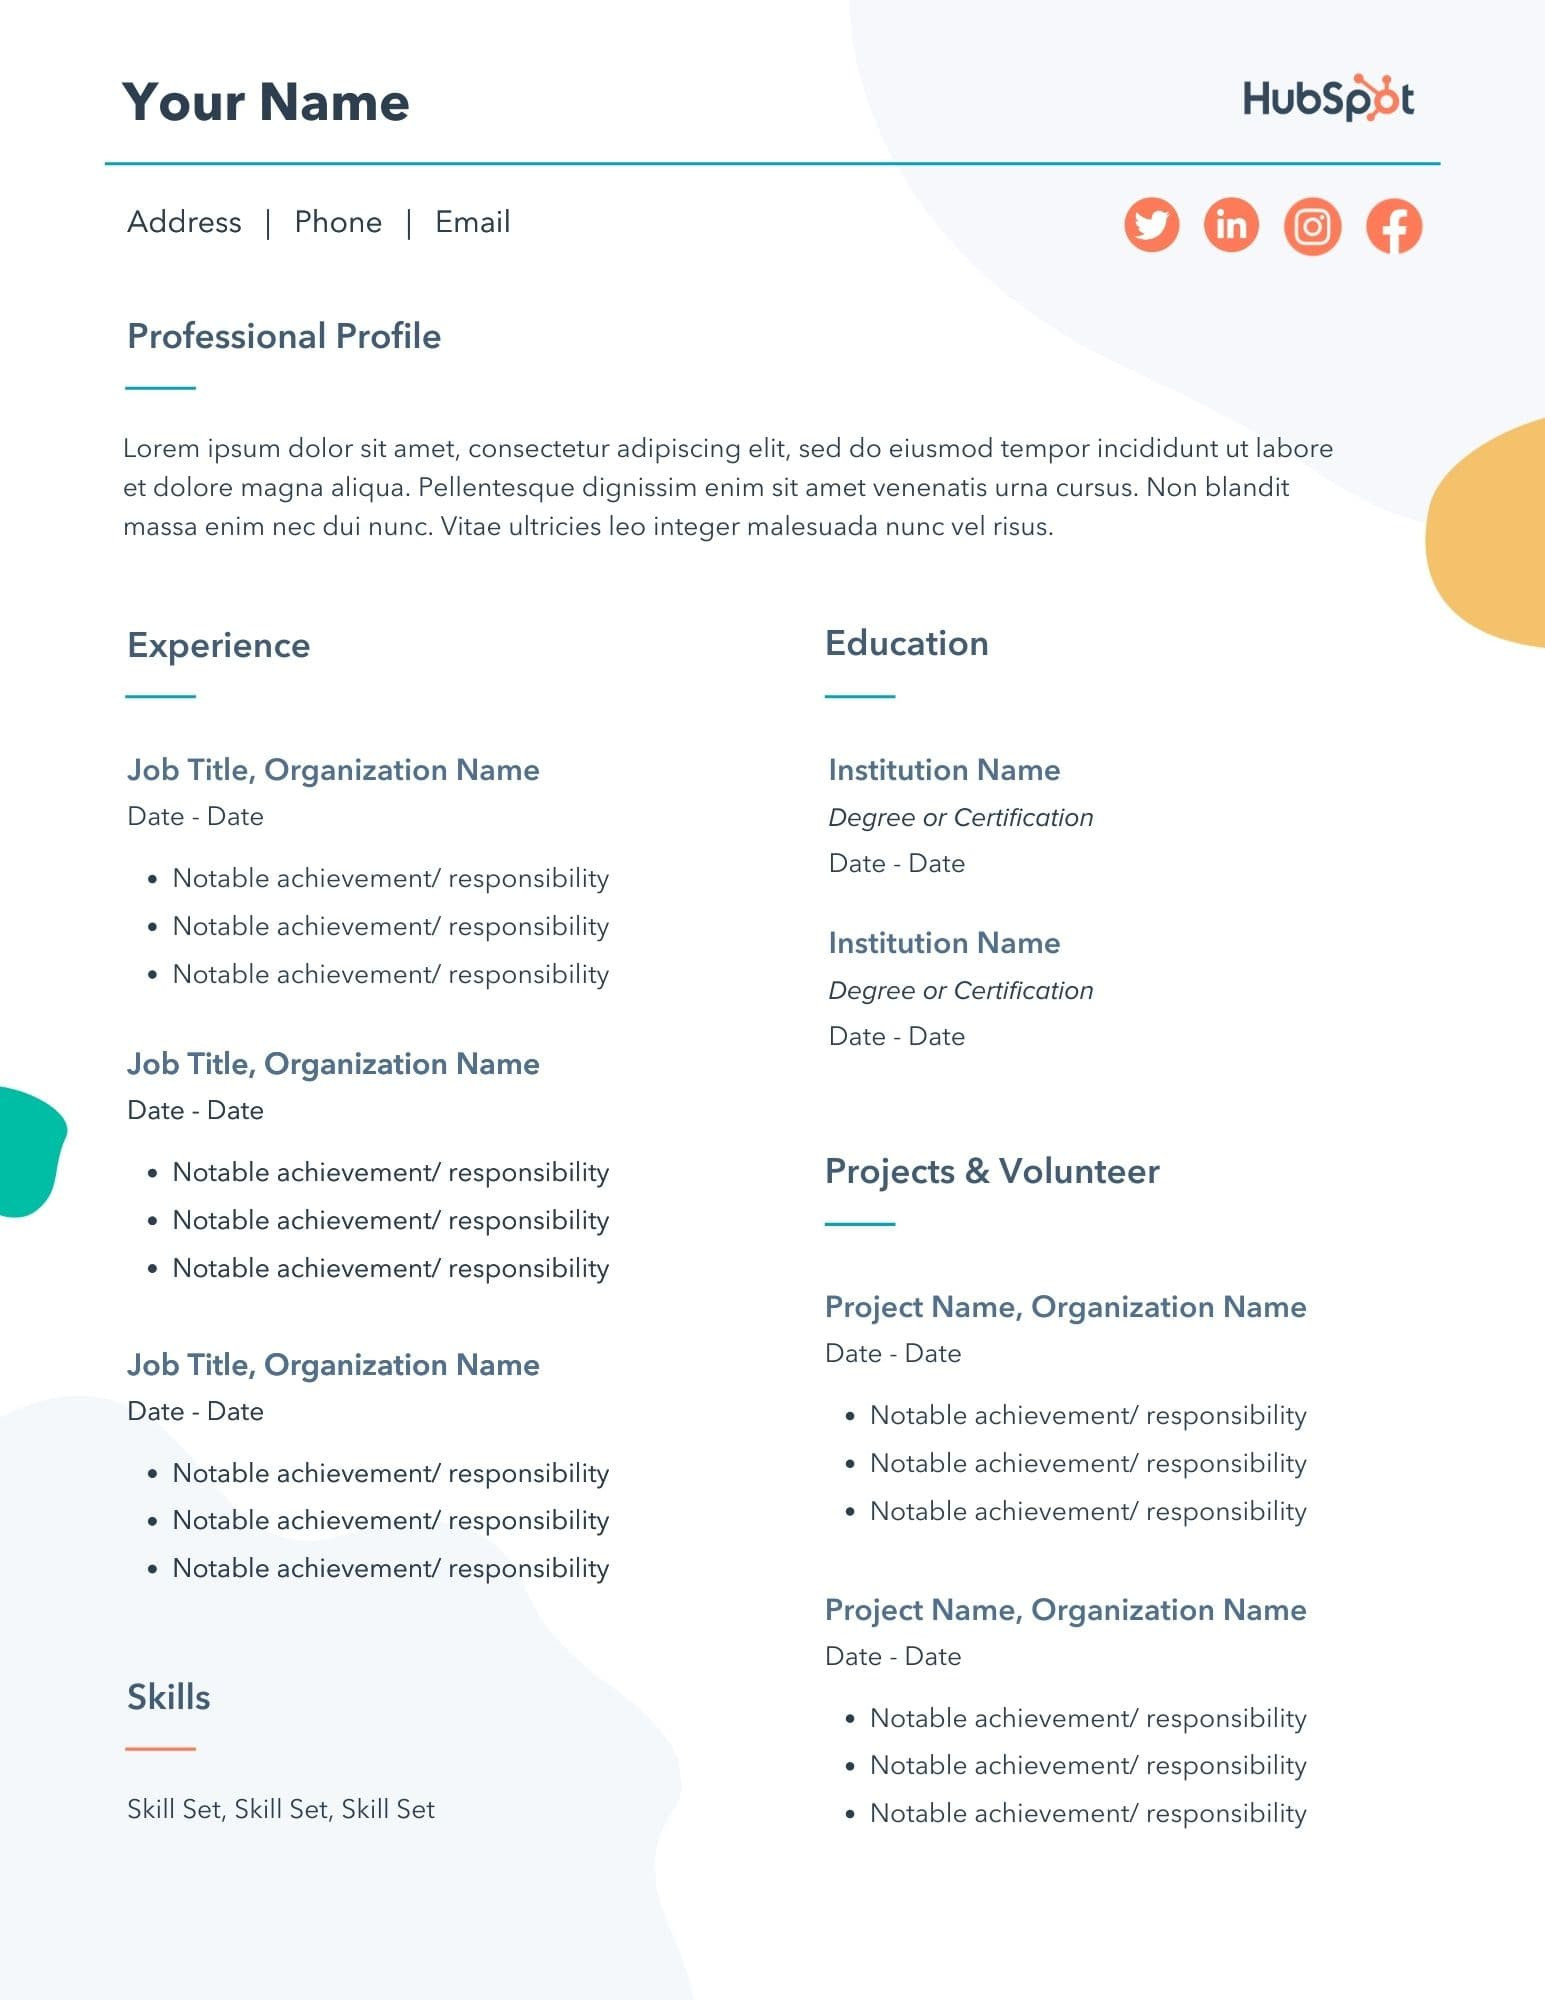 Email for Job Application with Resume Sample 29 Free Resume Templates for Microsoft Word (& How to Make Your Own)